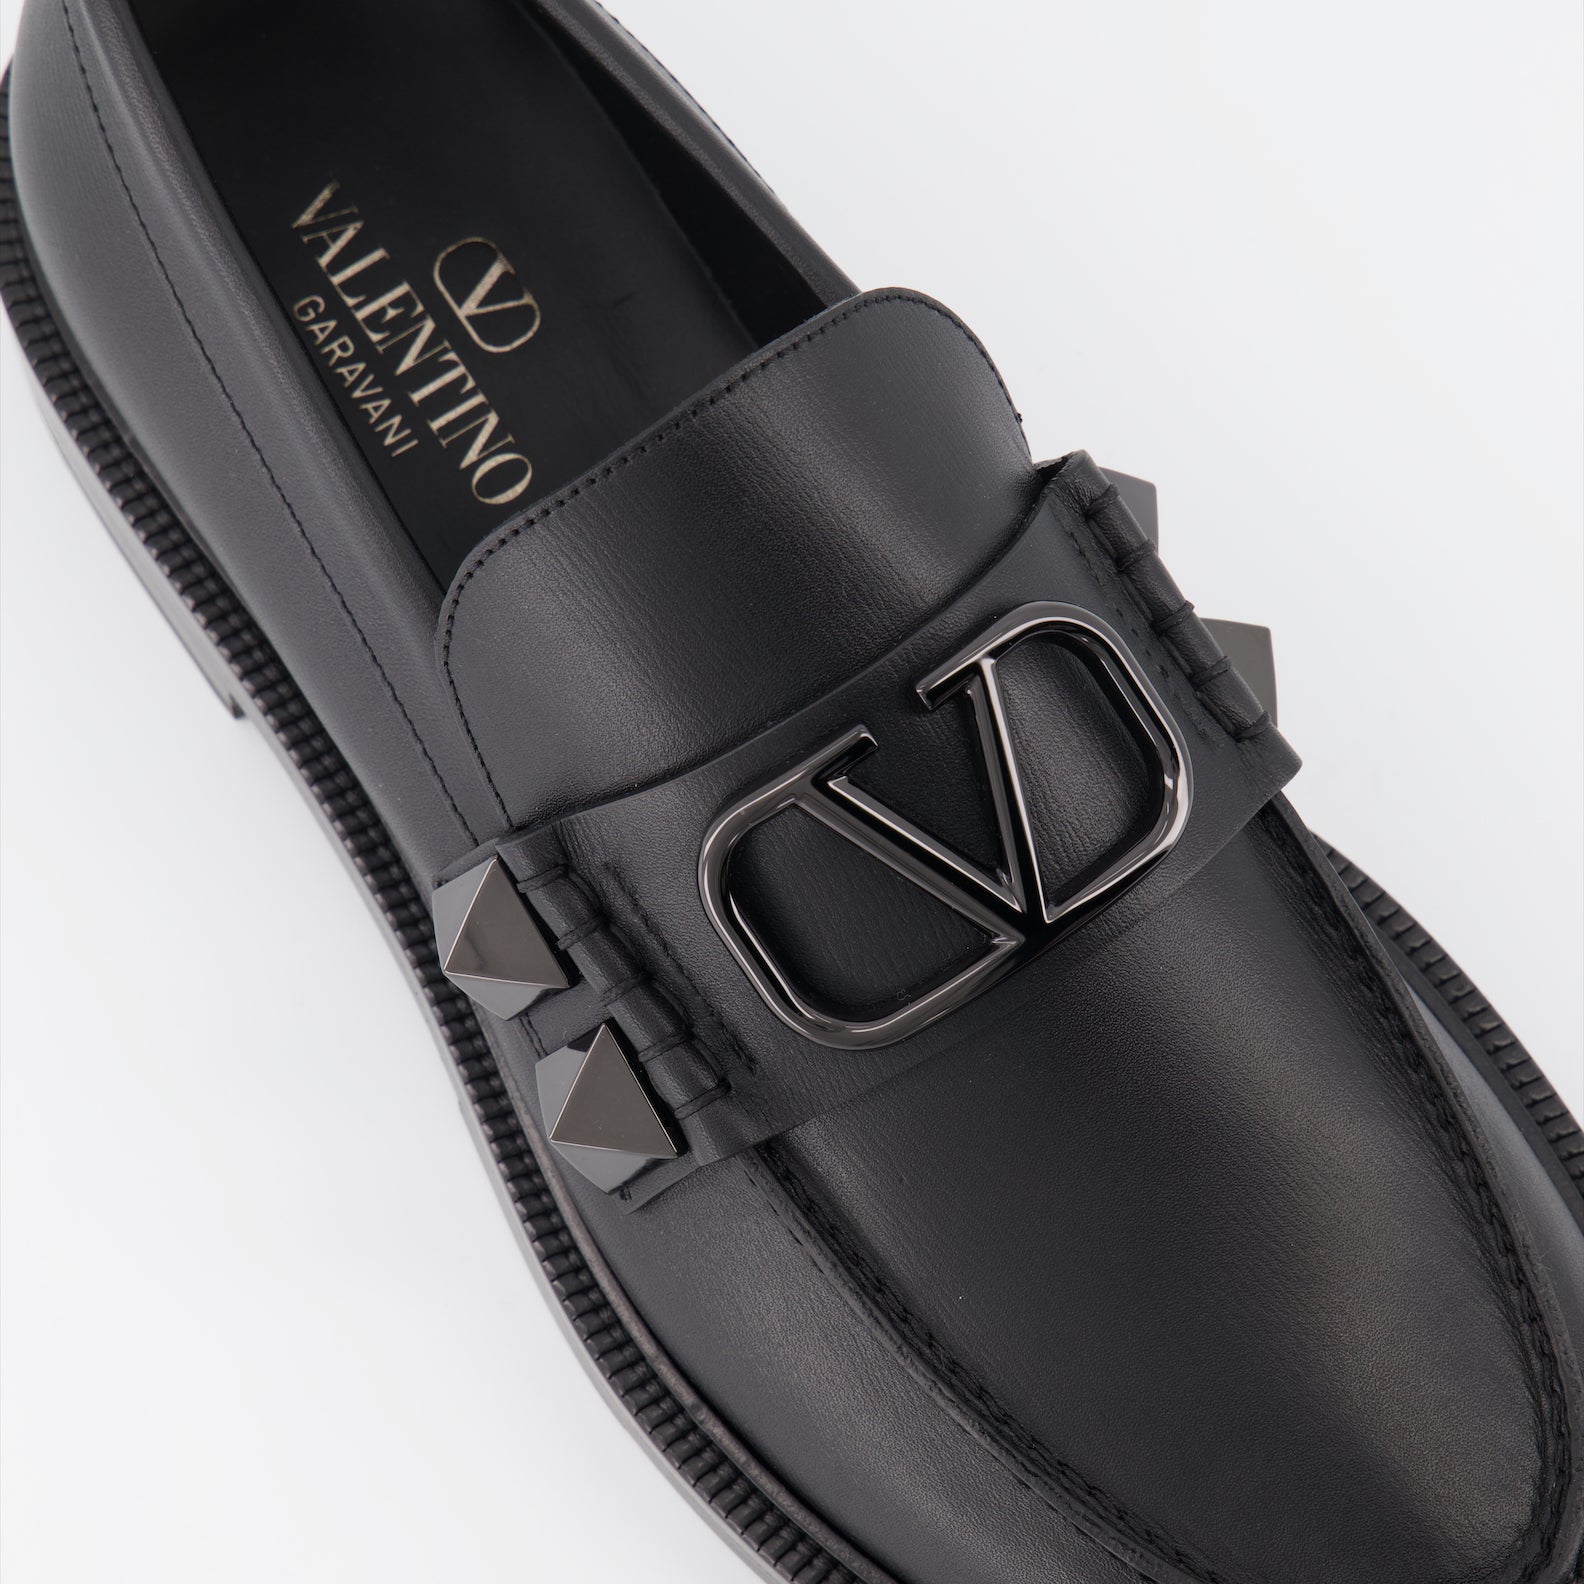 Stud Sign Loafers